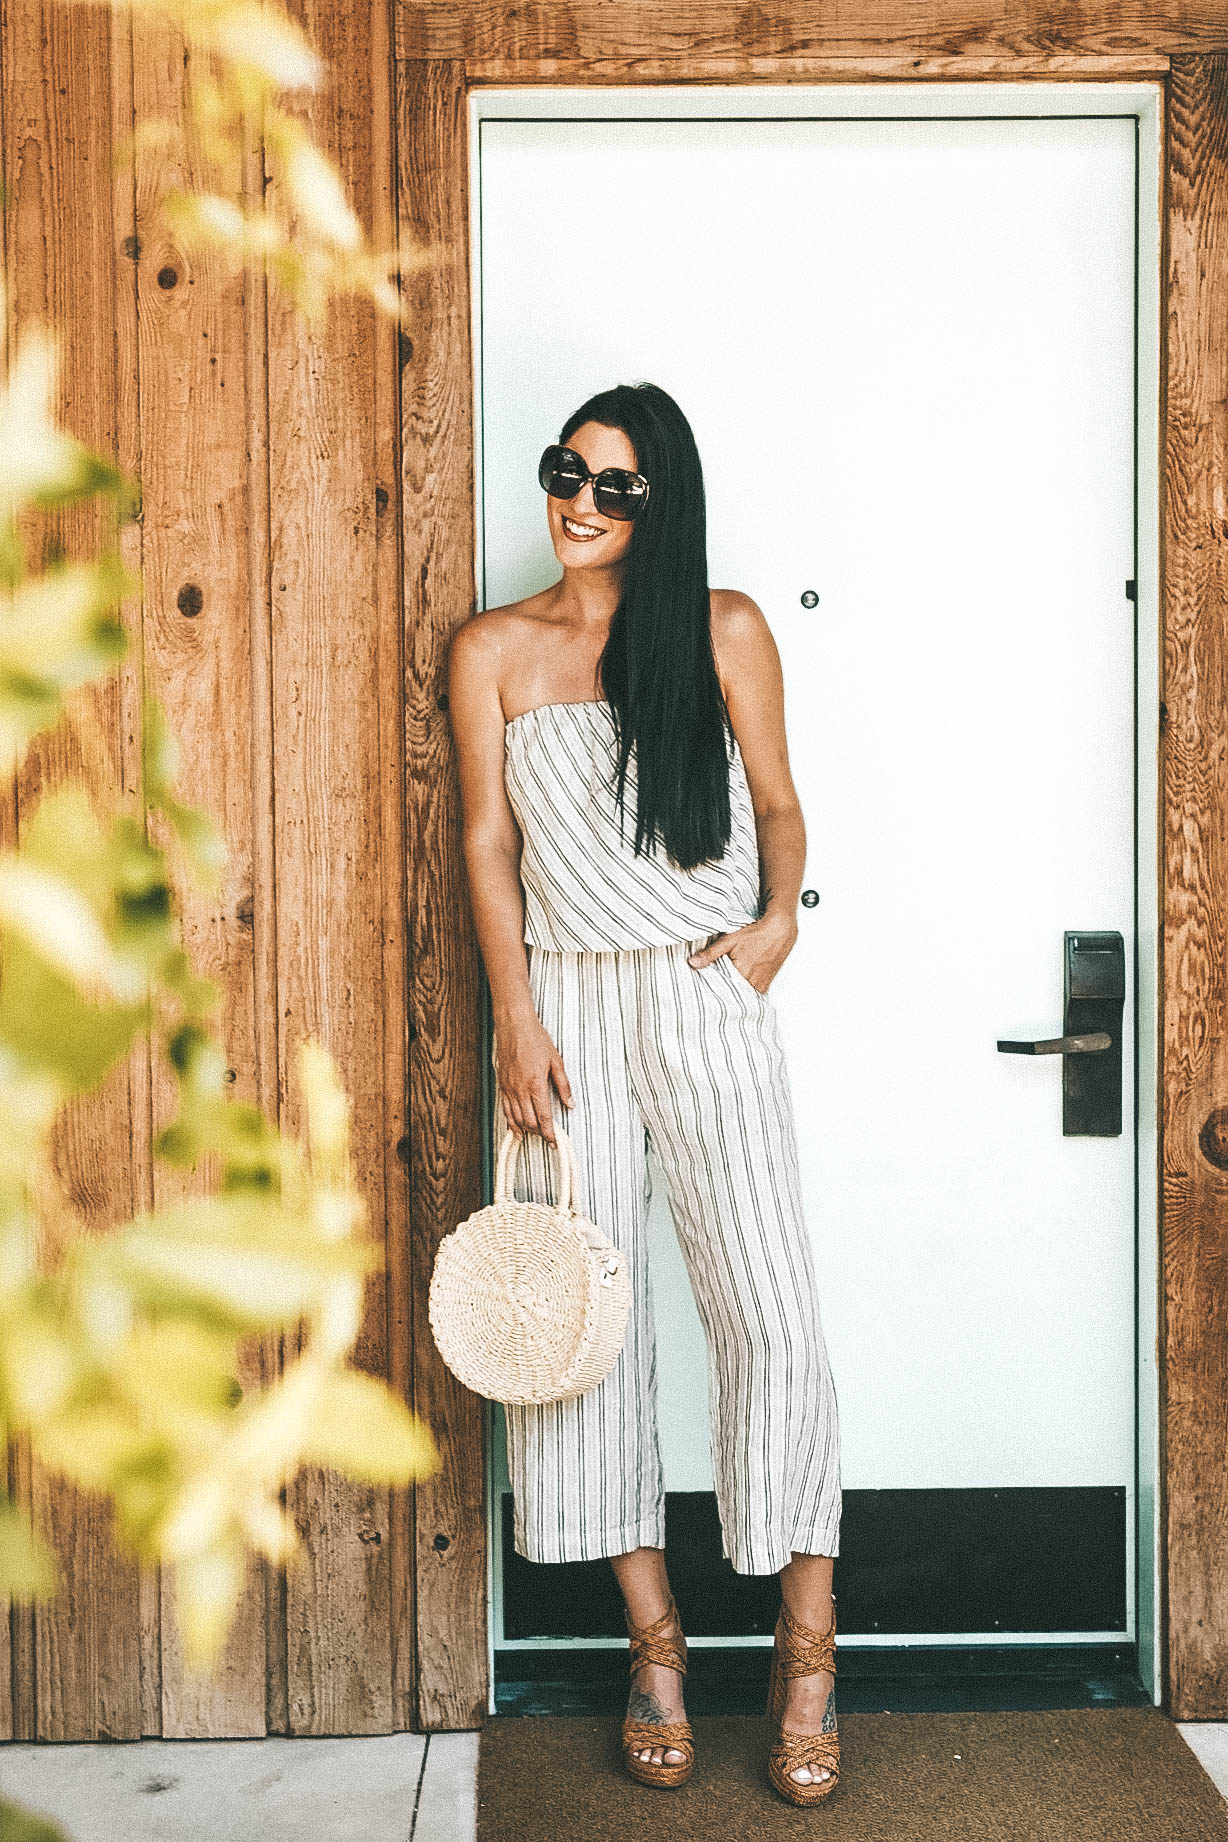 DTKAustin shares her favorite women's clothing from the new Joie at the Domain NORTHSIDE in Austin. Get an exclusive 20% off in Austin with code JOIENORTHSIDE. - Joie at Domain NORTHSIDE in Austin + Exclusive Discount} featured by popular Austin fashion blogger, Dressed to Kill